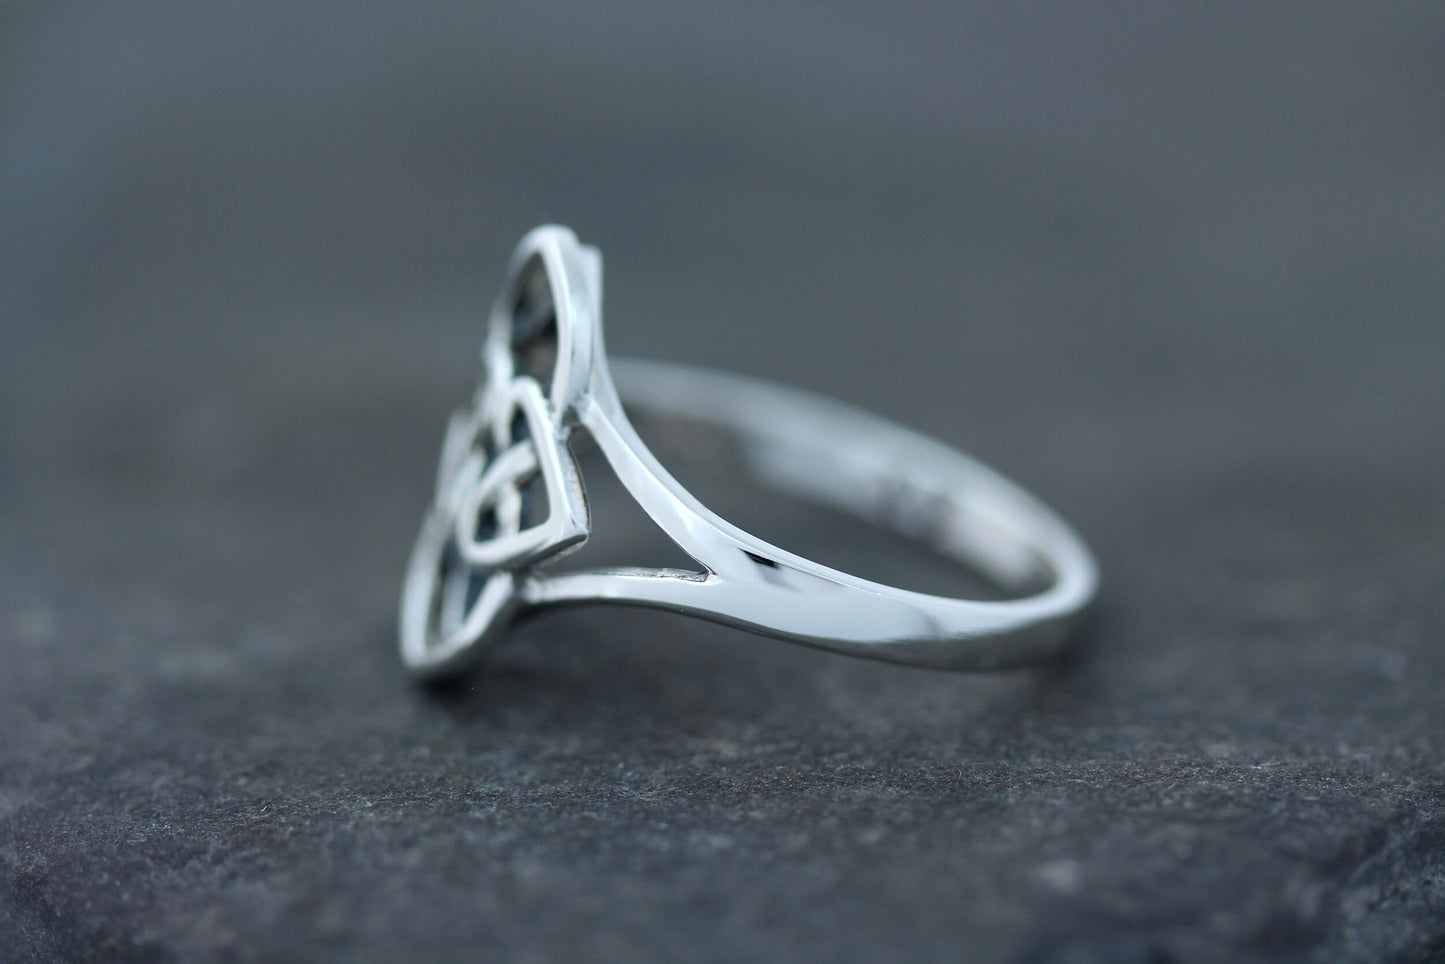 Celtic Knot Ring - Two Hearts in Diamond Loop